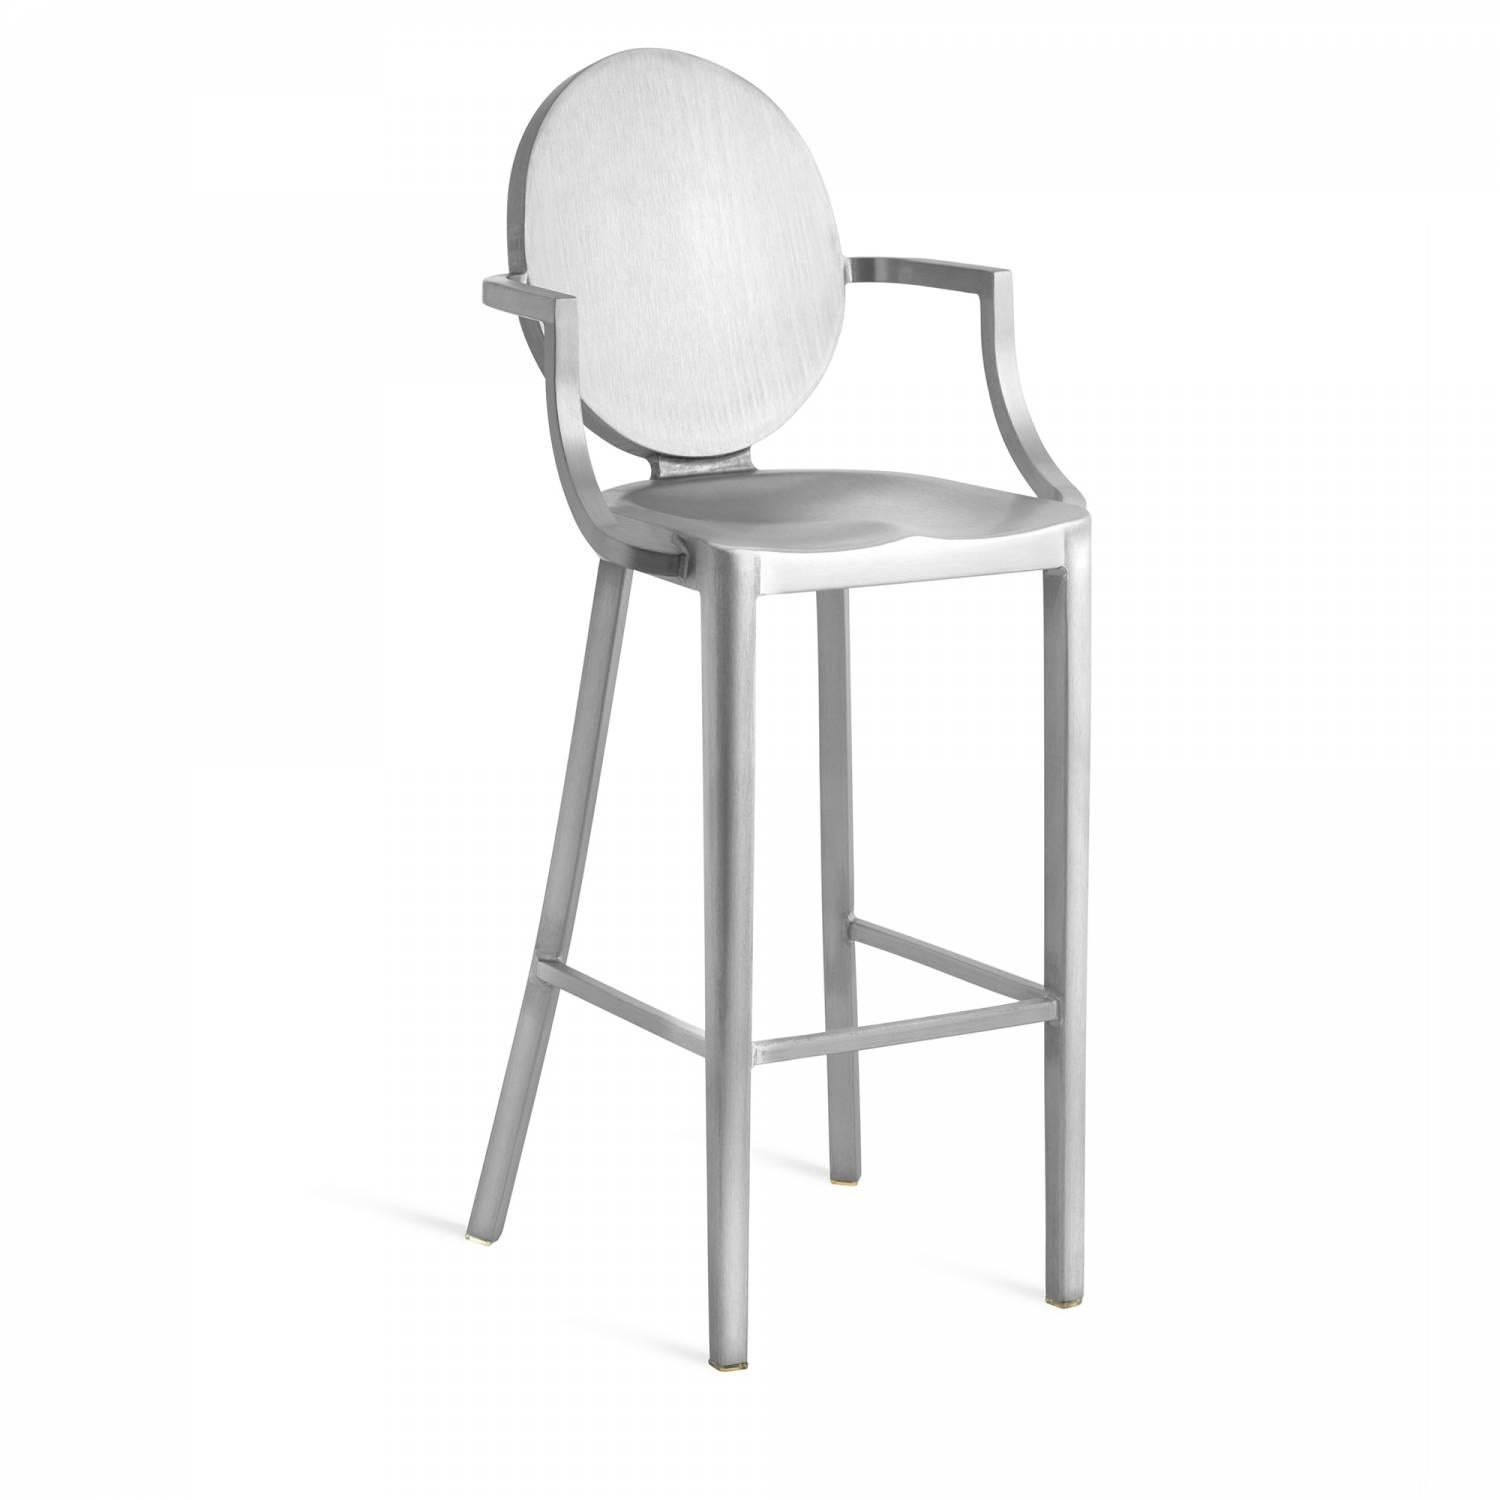 Starck first designed the Kong barstool for the Chinese restaurant Kong in Paris. The one armed stool was intended to make it easy and graceful for the super model clientele to slither in and out of the bar. Kong requires the hand welding of 24